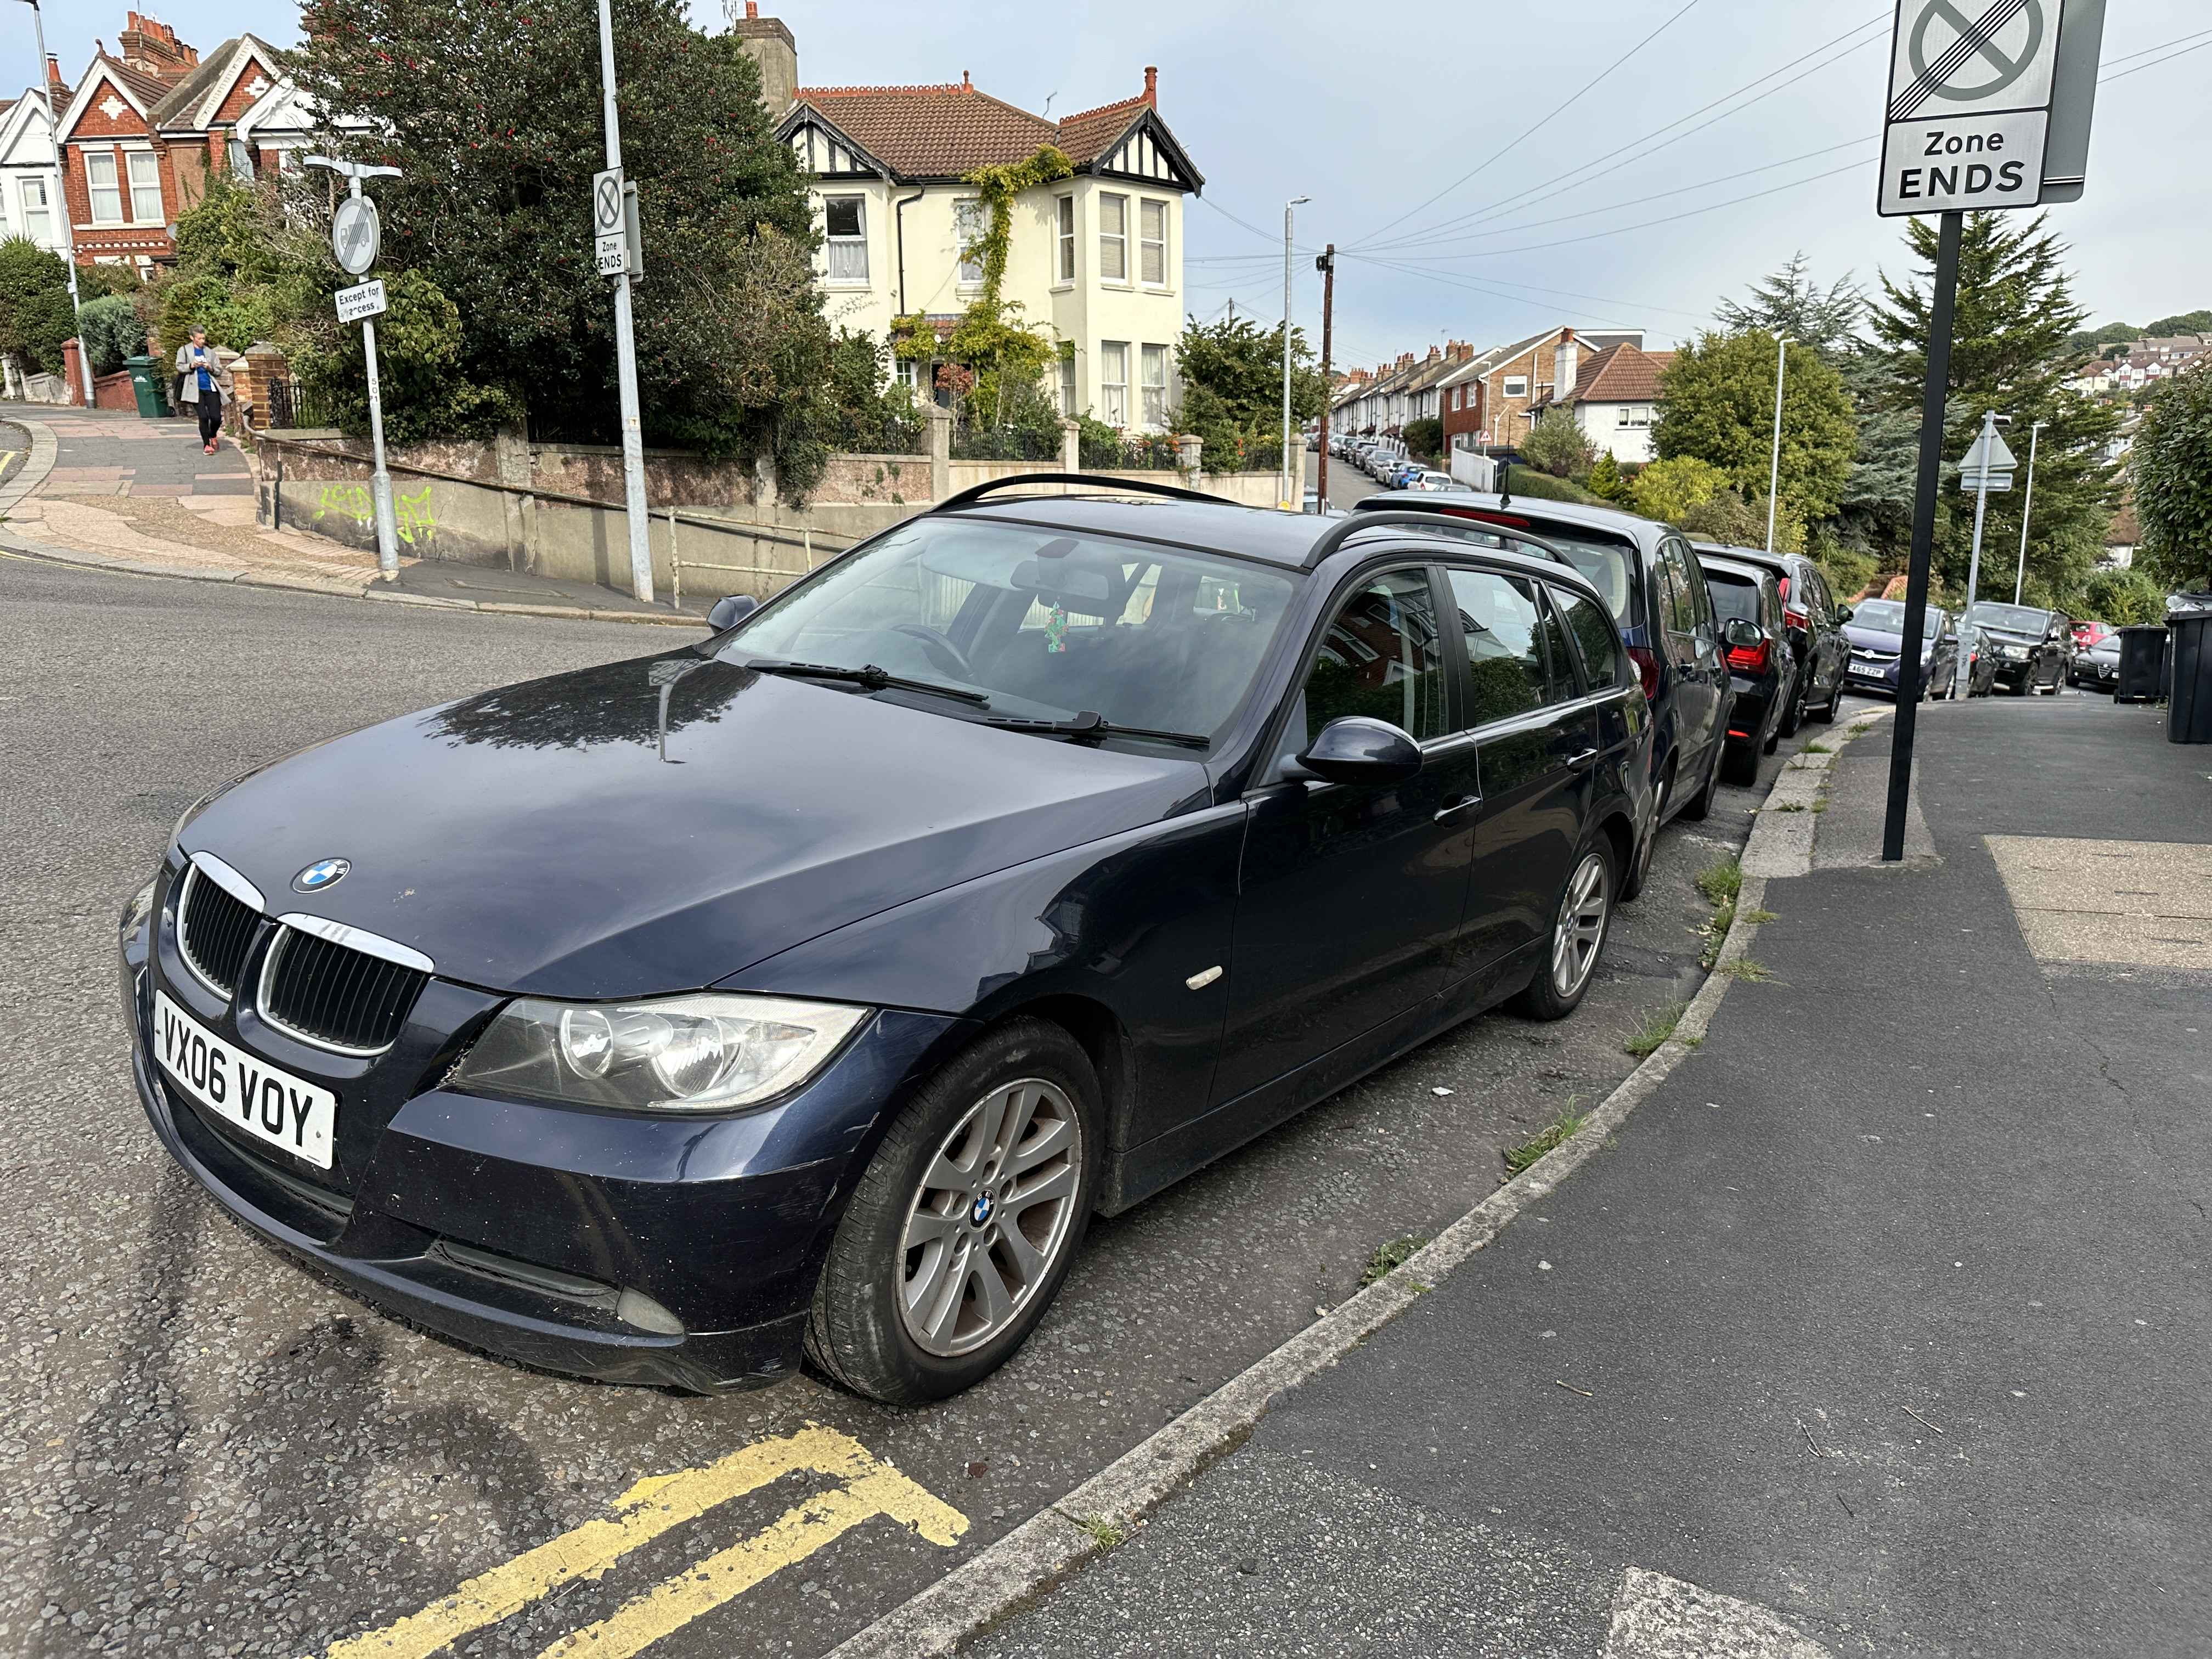 Photograph of VX06 VOY - a Blue BMW 3 Series parked in Hollingdean by a non-resident who uses the local area as part of their Brighton commute. The first of two photographs supplied by the residents of Hollingdean.